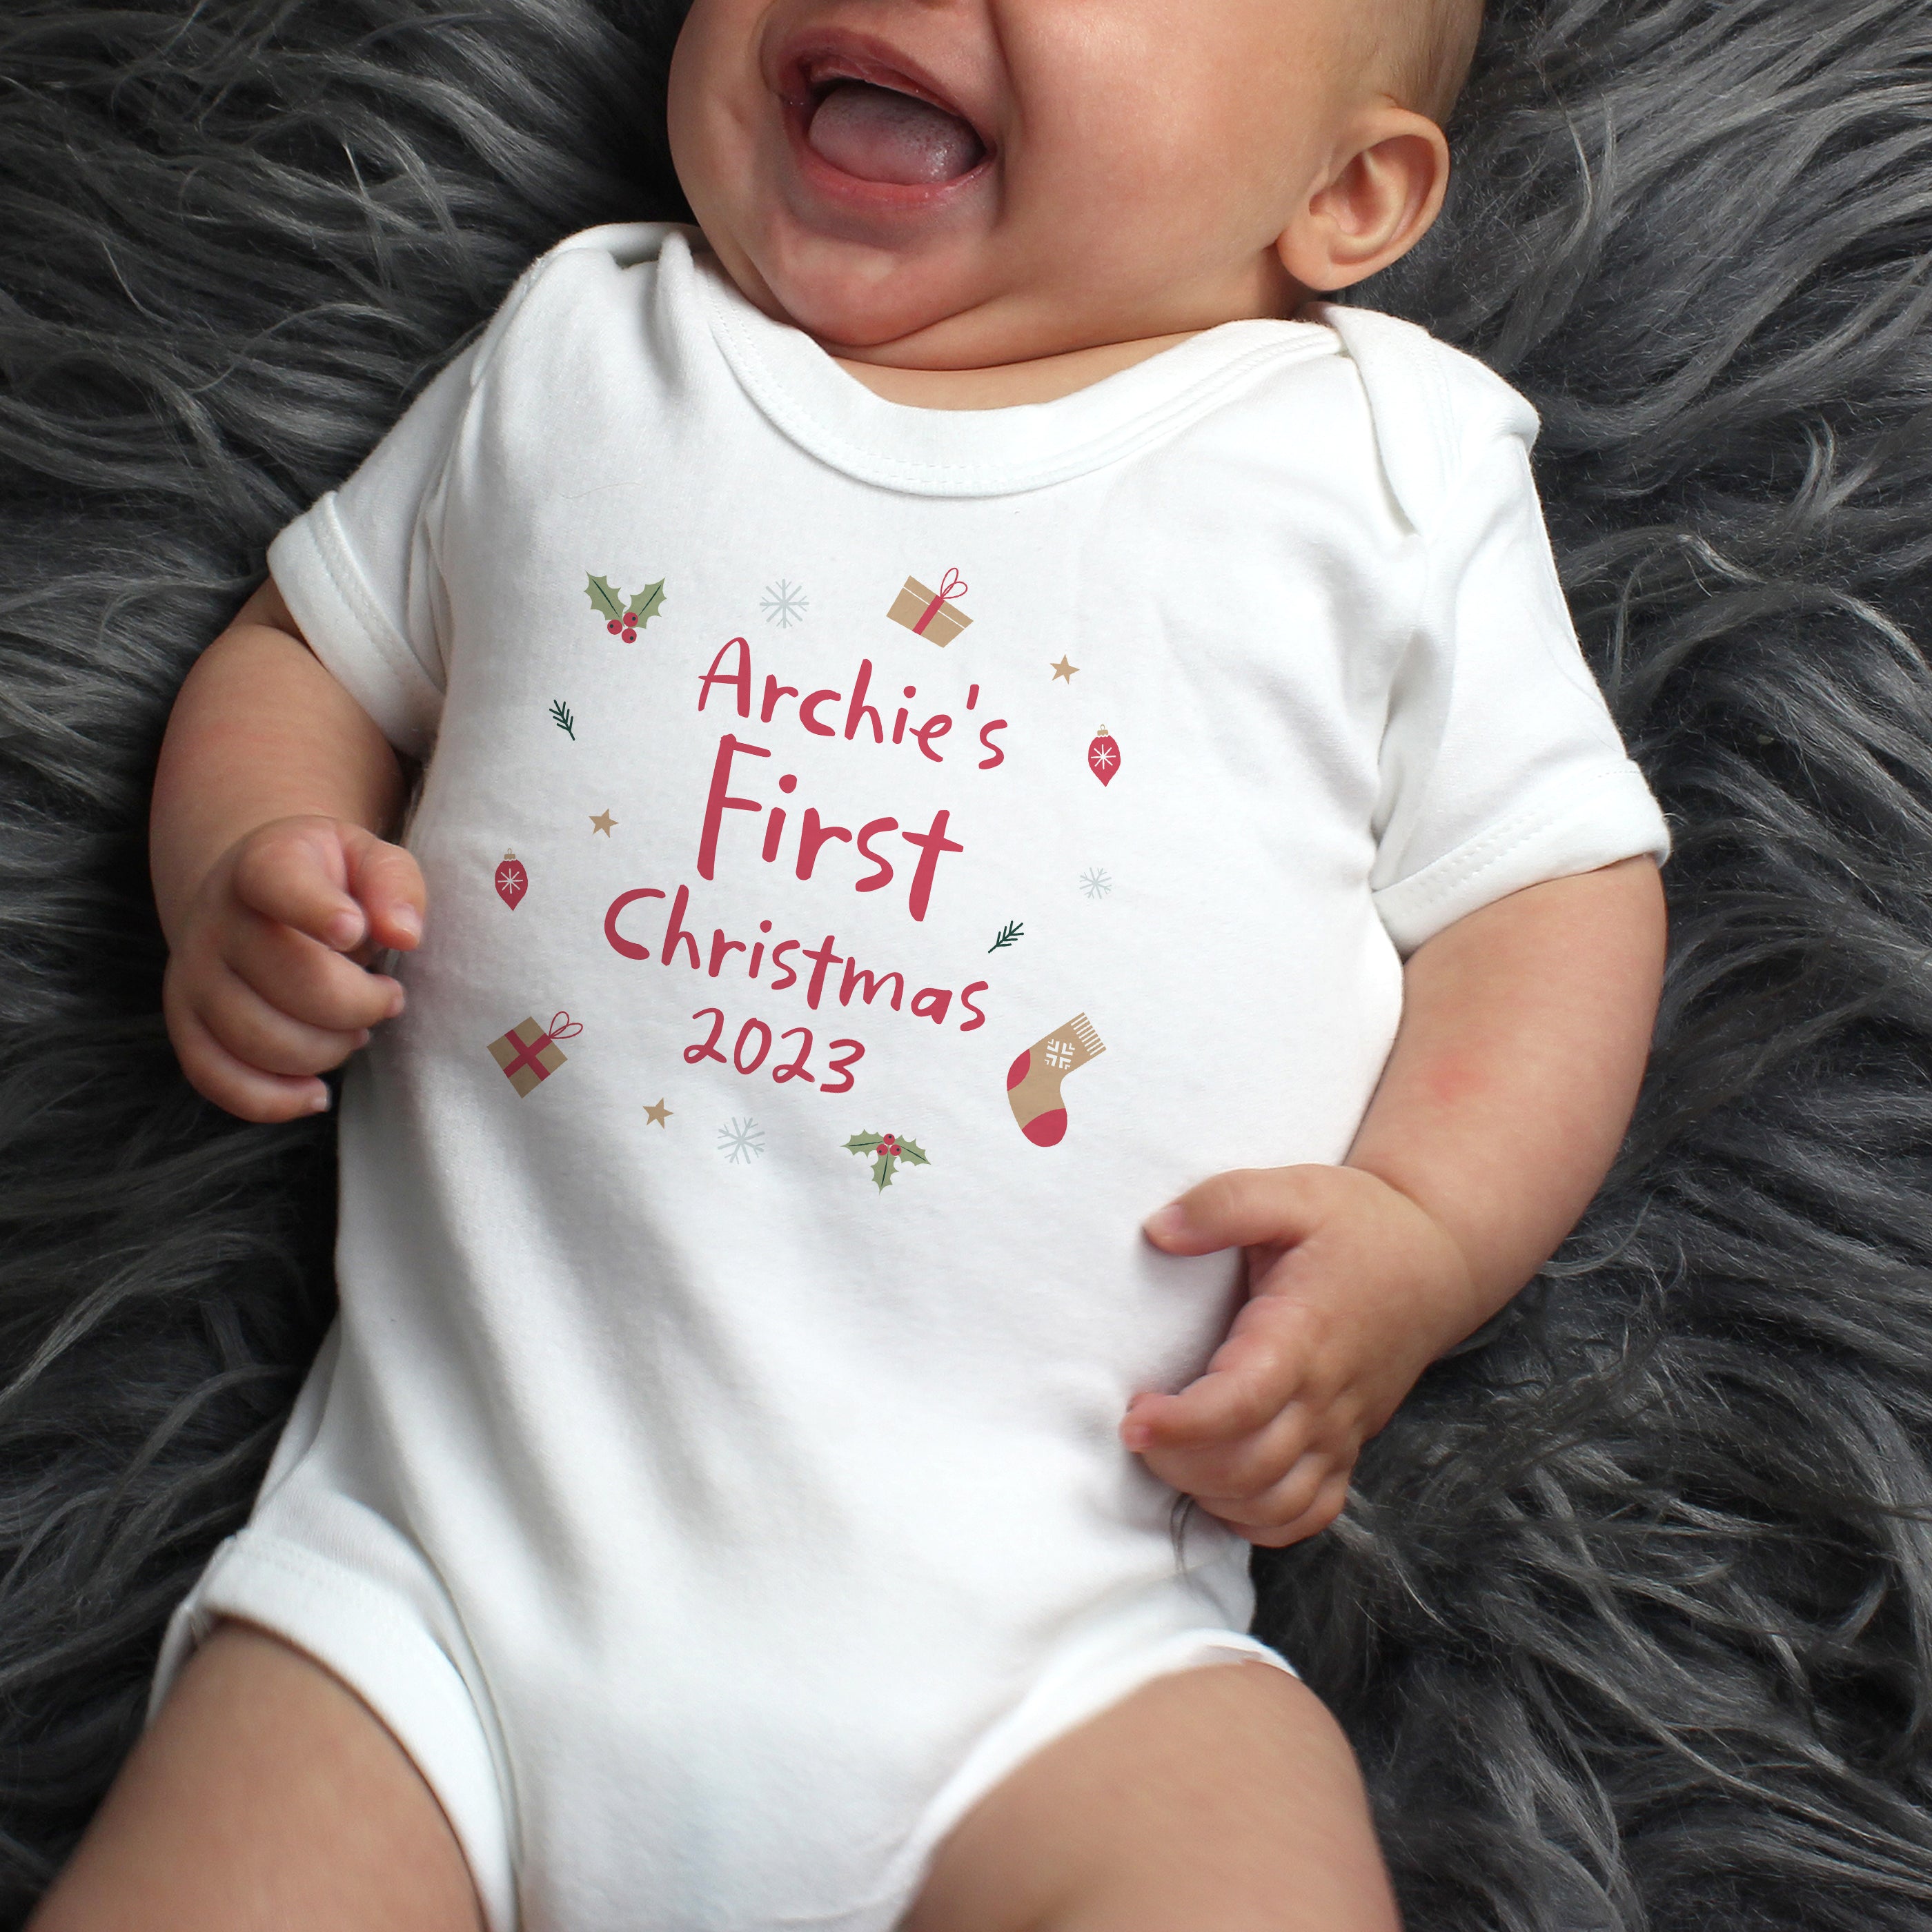 Personalised First Christmas Baby Vest (0-3 months)